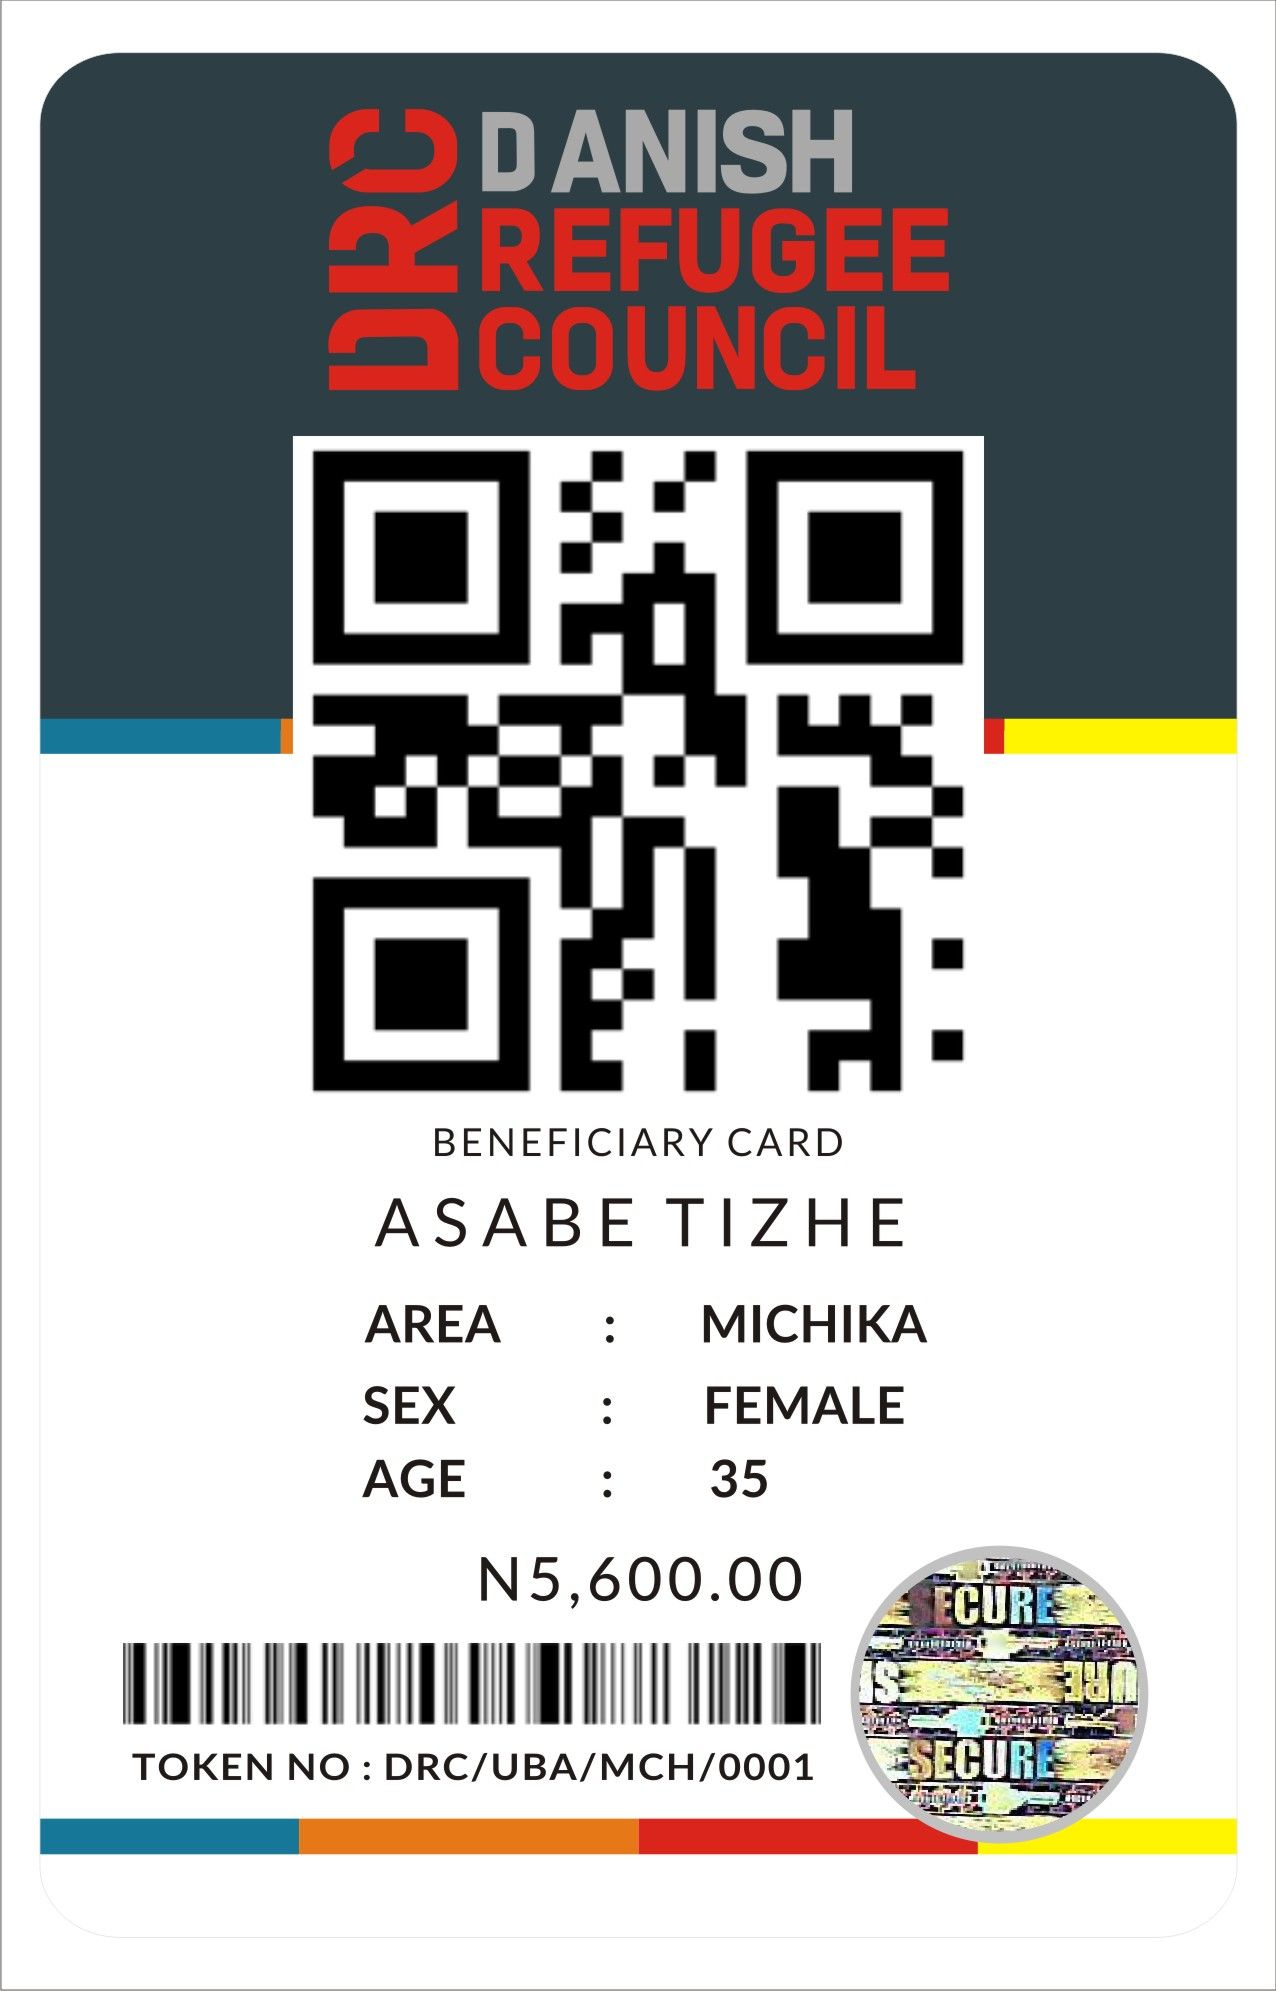 PRINT QR CODE, BARCODE, AUTHENTICATION LABELS CALL EMMANUEL ON 08176499649